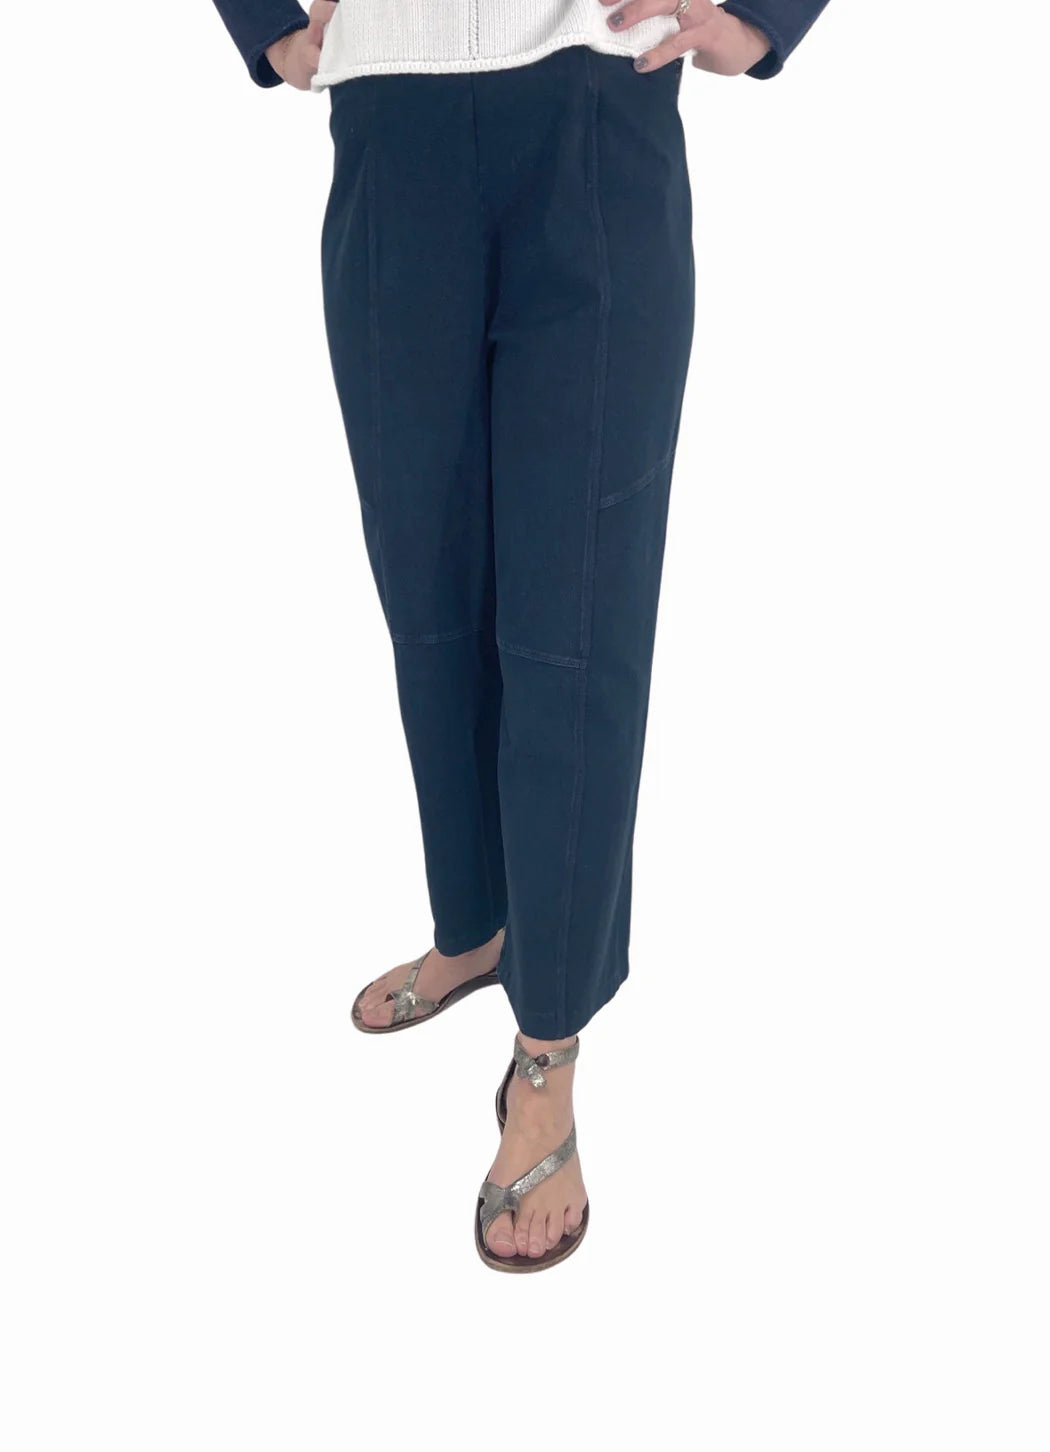 Spring Forward Apparel Sale! - Stone Washed Flood Pant in Denim by